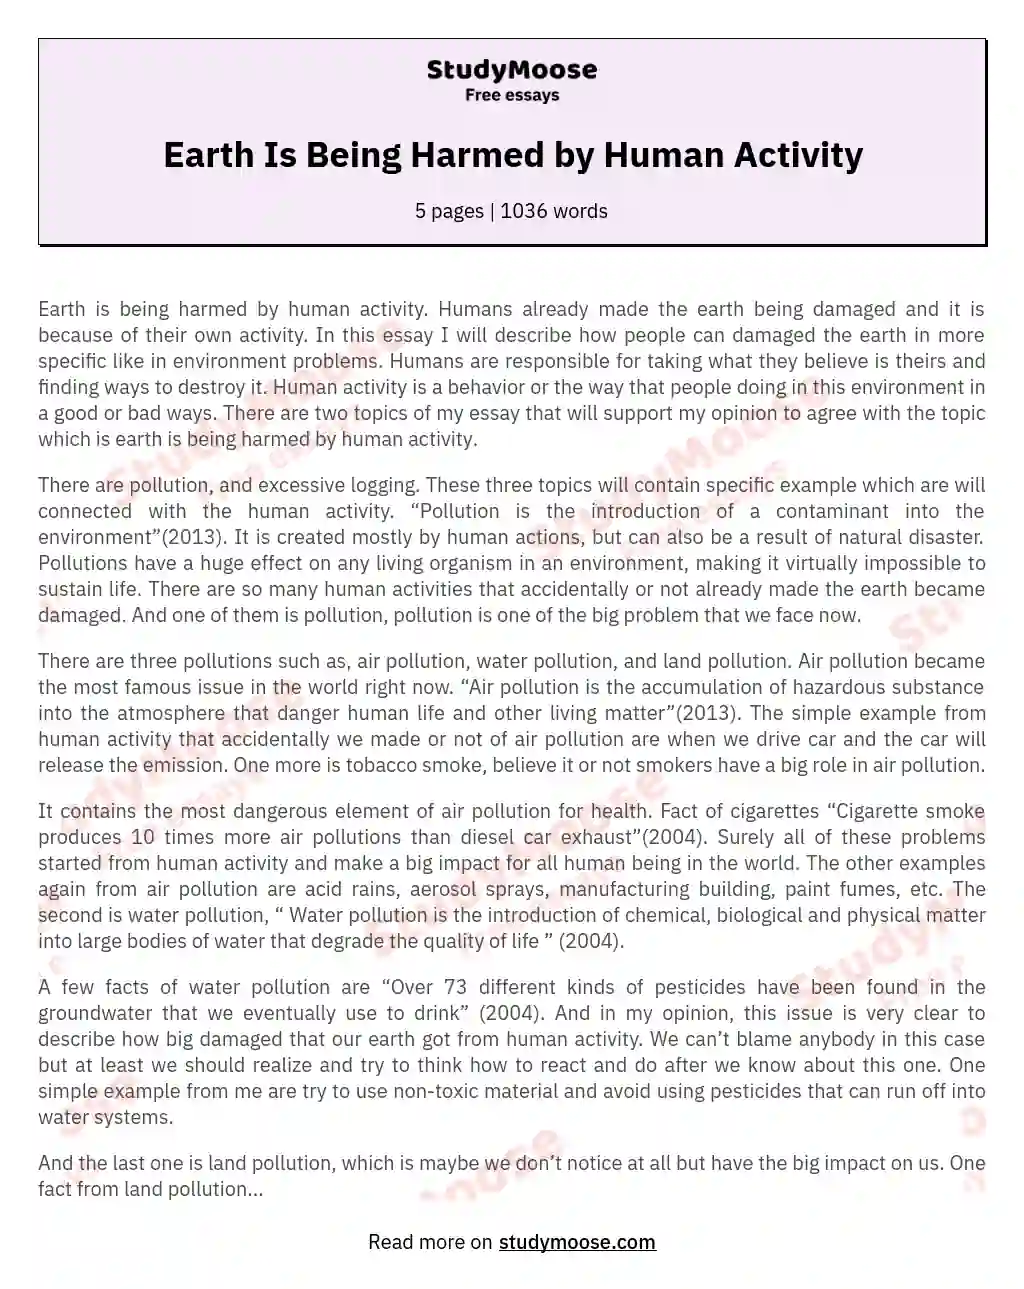 Earth Is Being Harmed by Human Activity essay